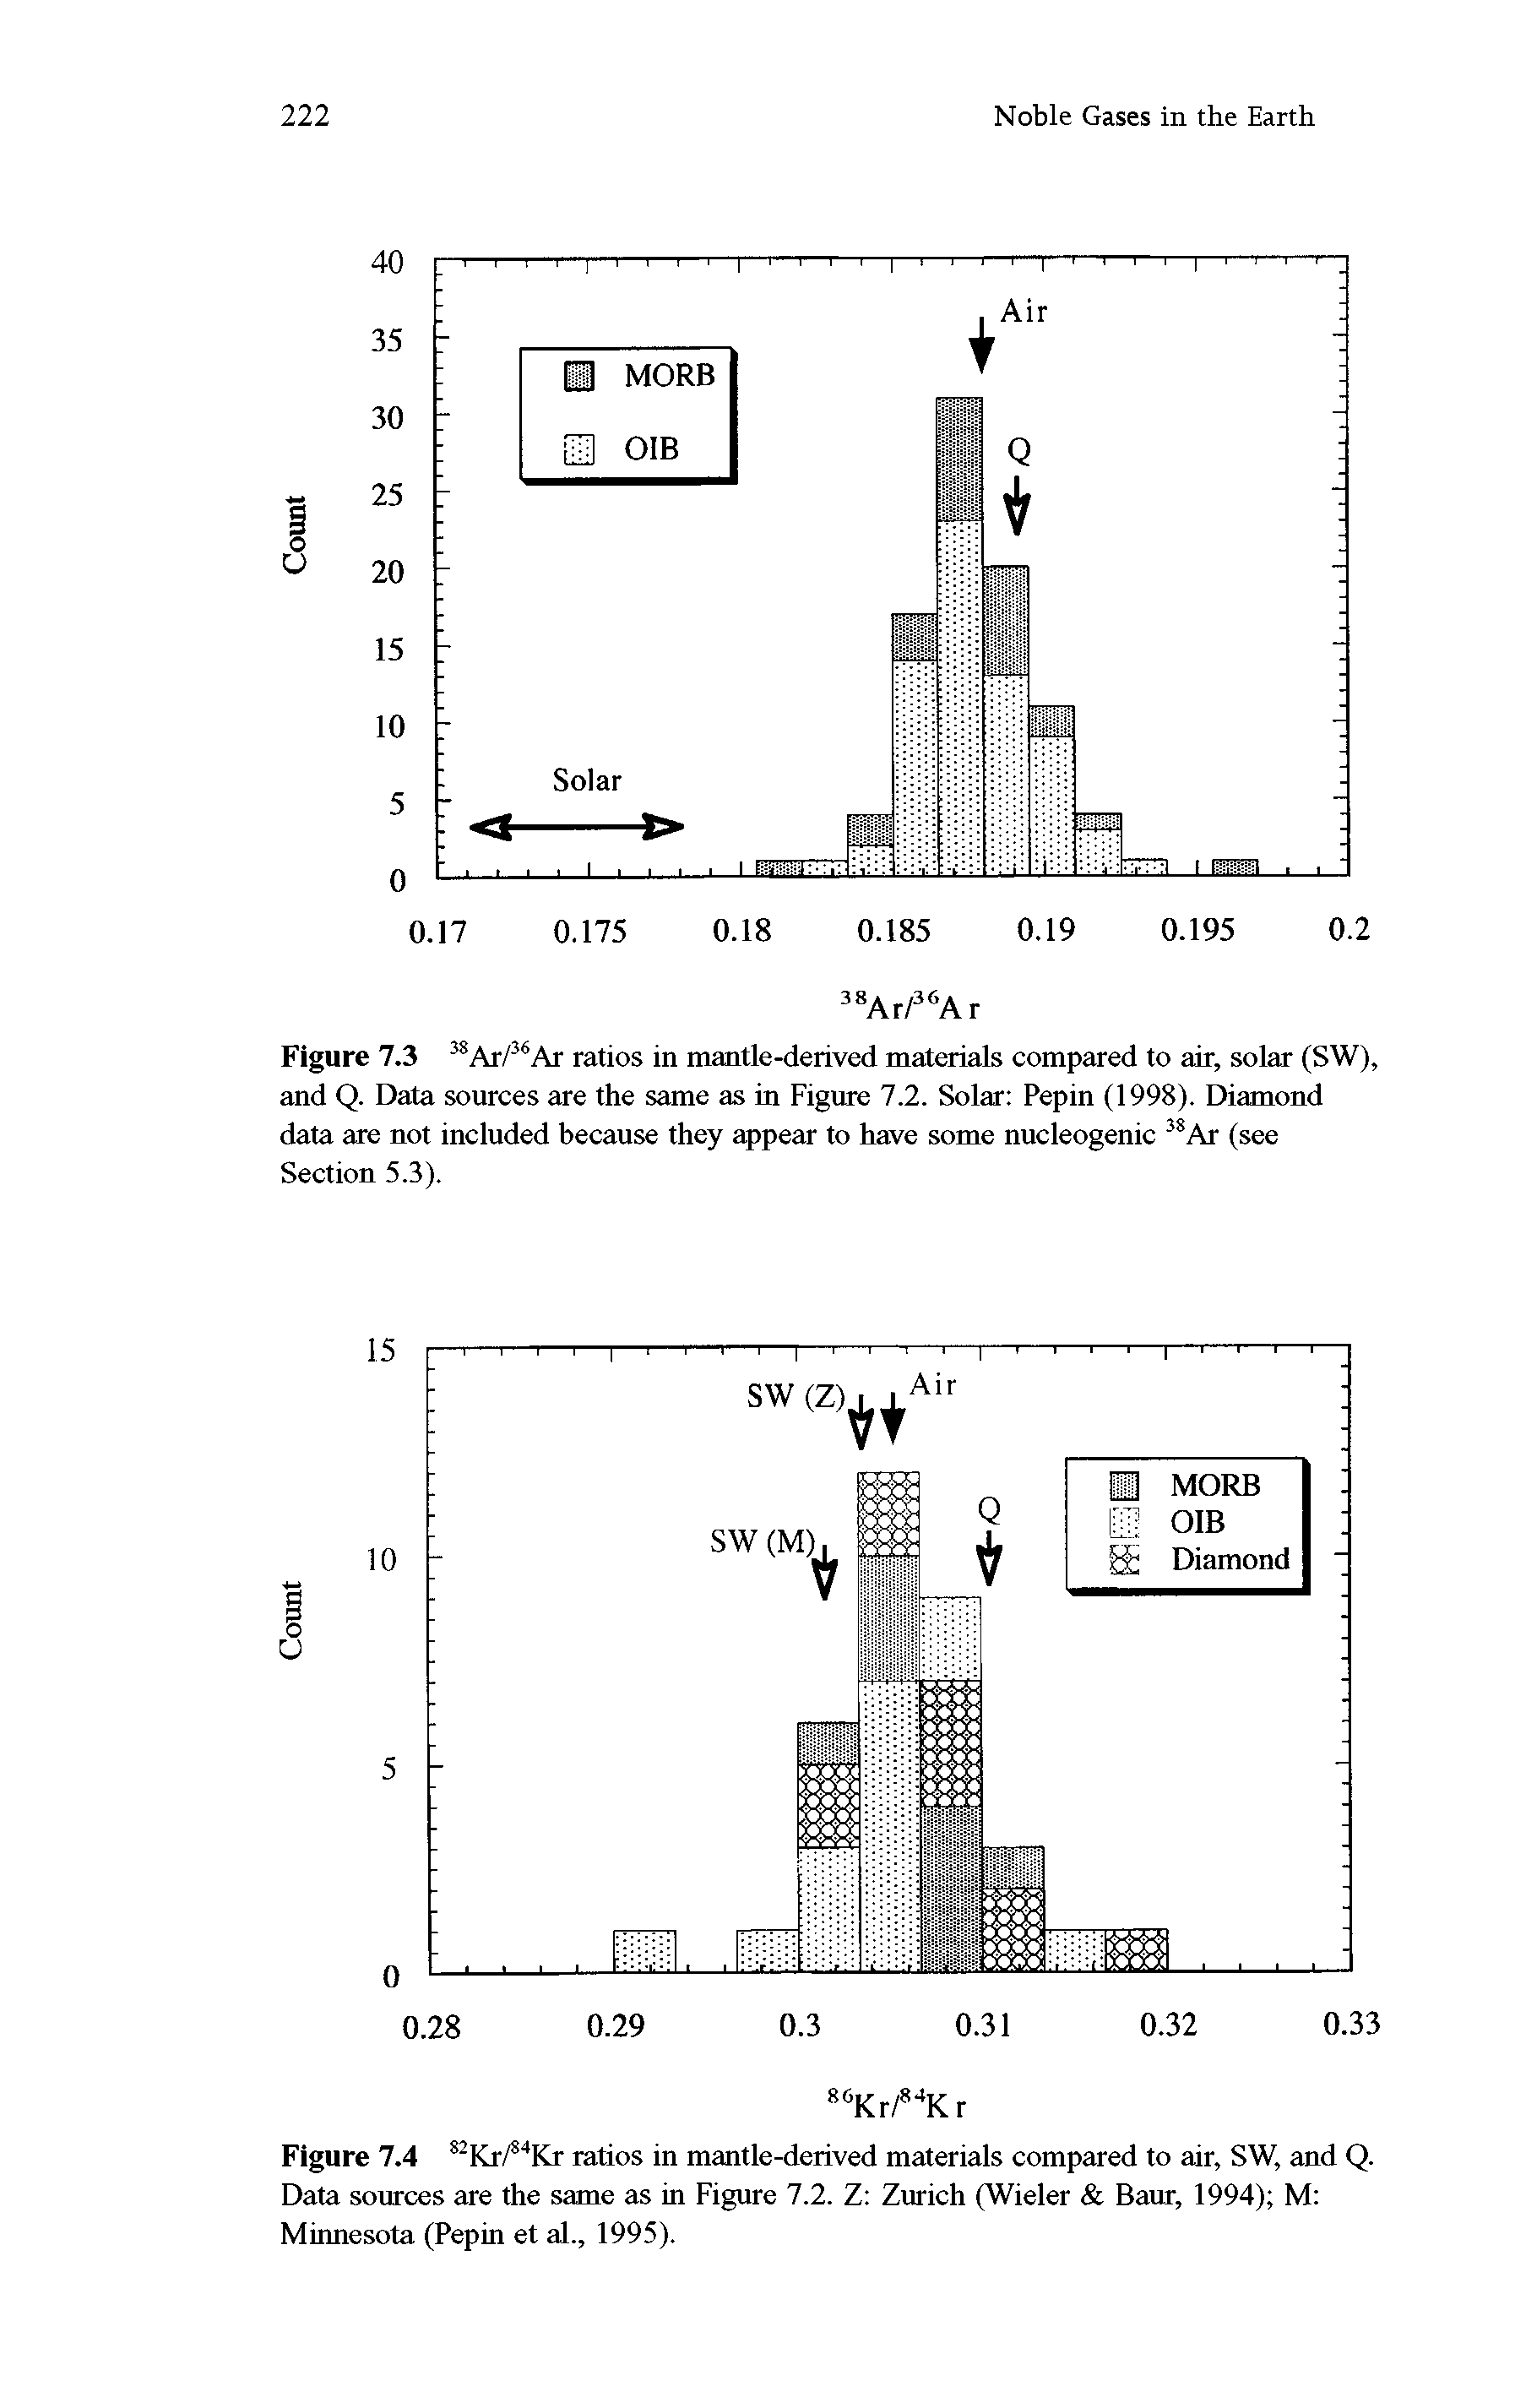 Figure 7.4 82Kr/84Kr ratios in mantle-derived materials compared to air, SW, and Q. Data sources are the same as in Figure 7.2. Z Zurich (Wieler Baur, 1994) M Minnesota (Pepin et al., 1995).